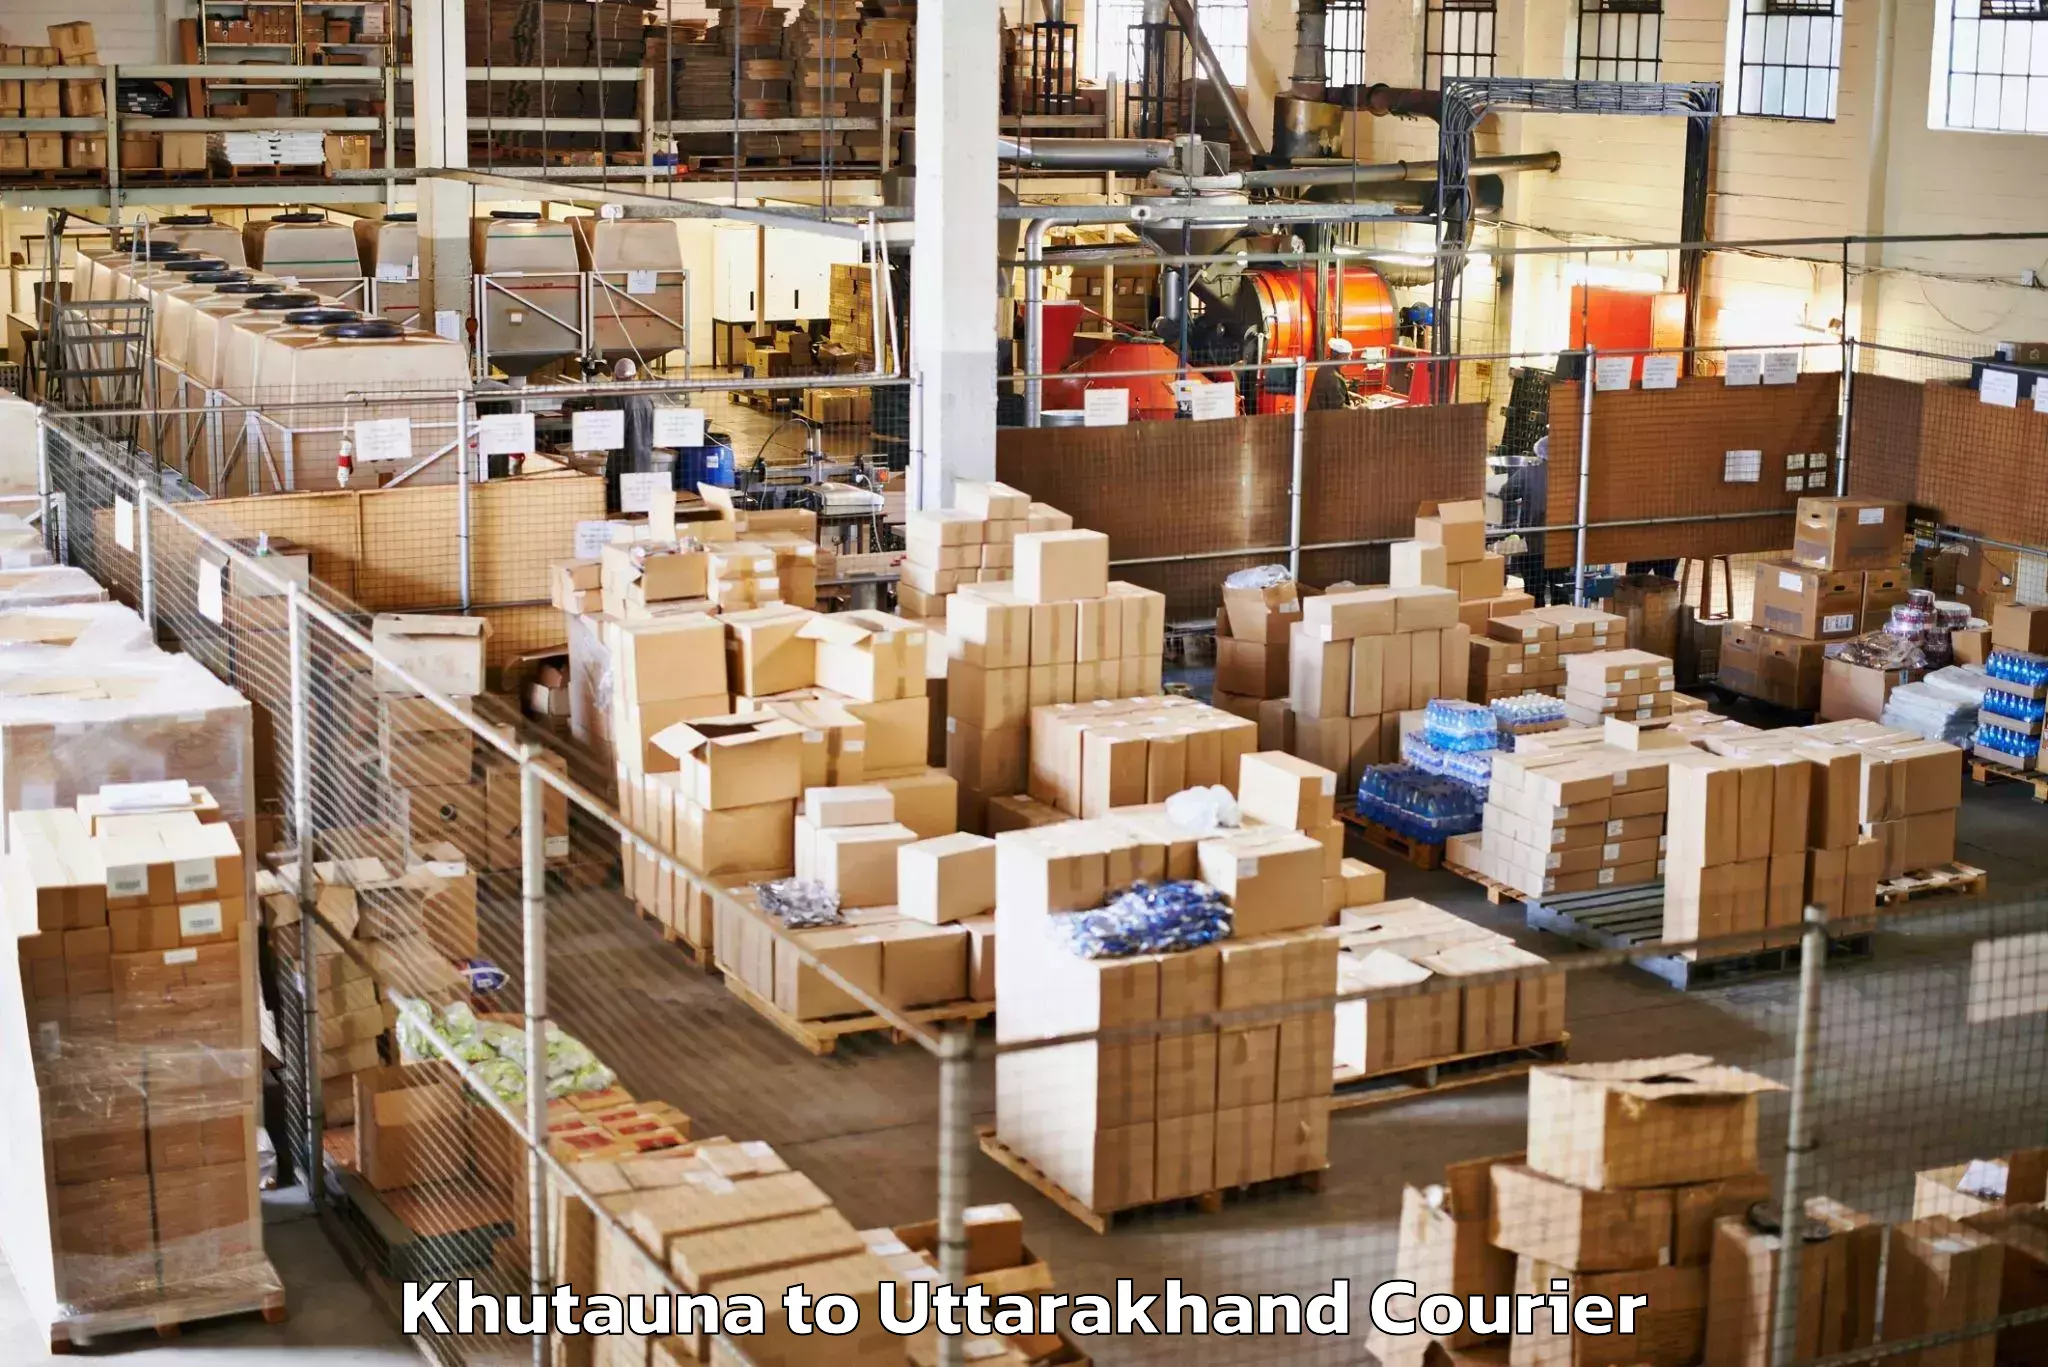 Baggage shipping schedule Khutauna to Rudrapur